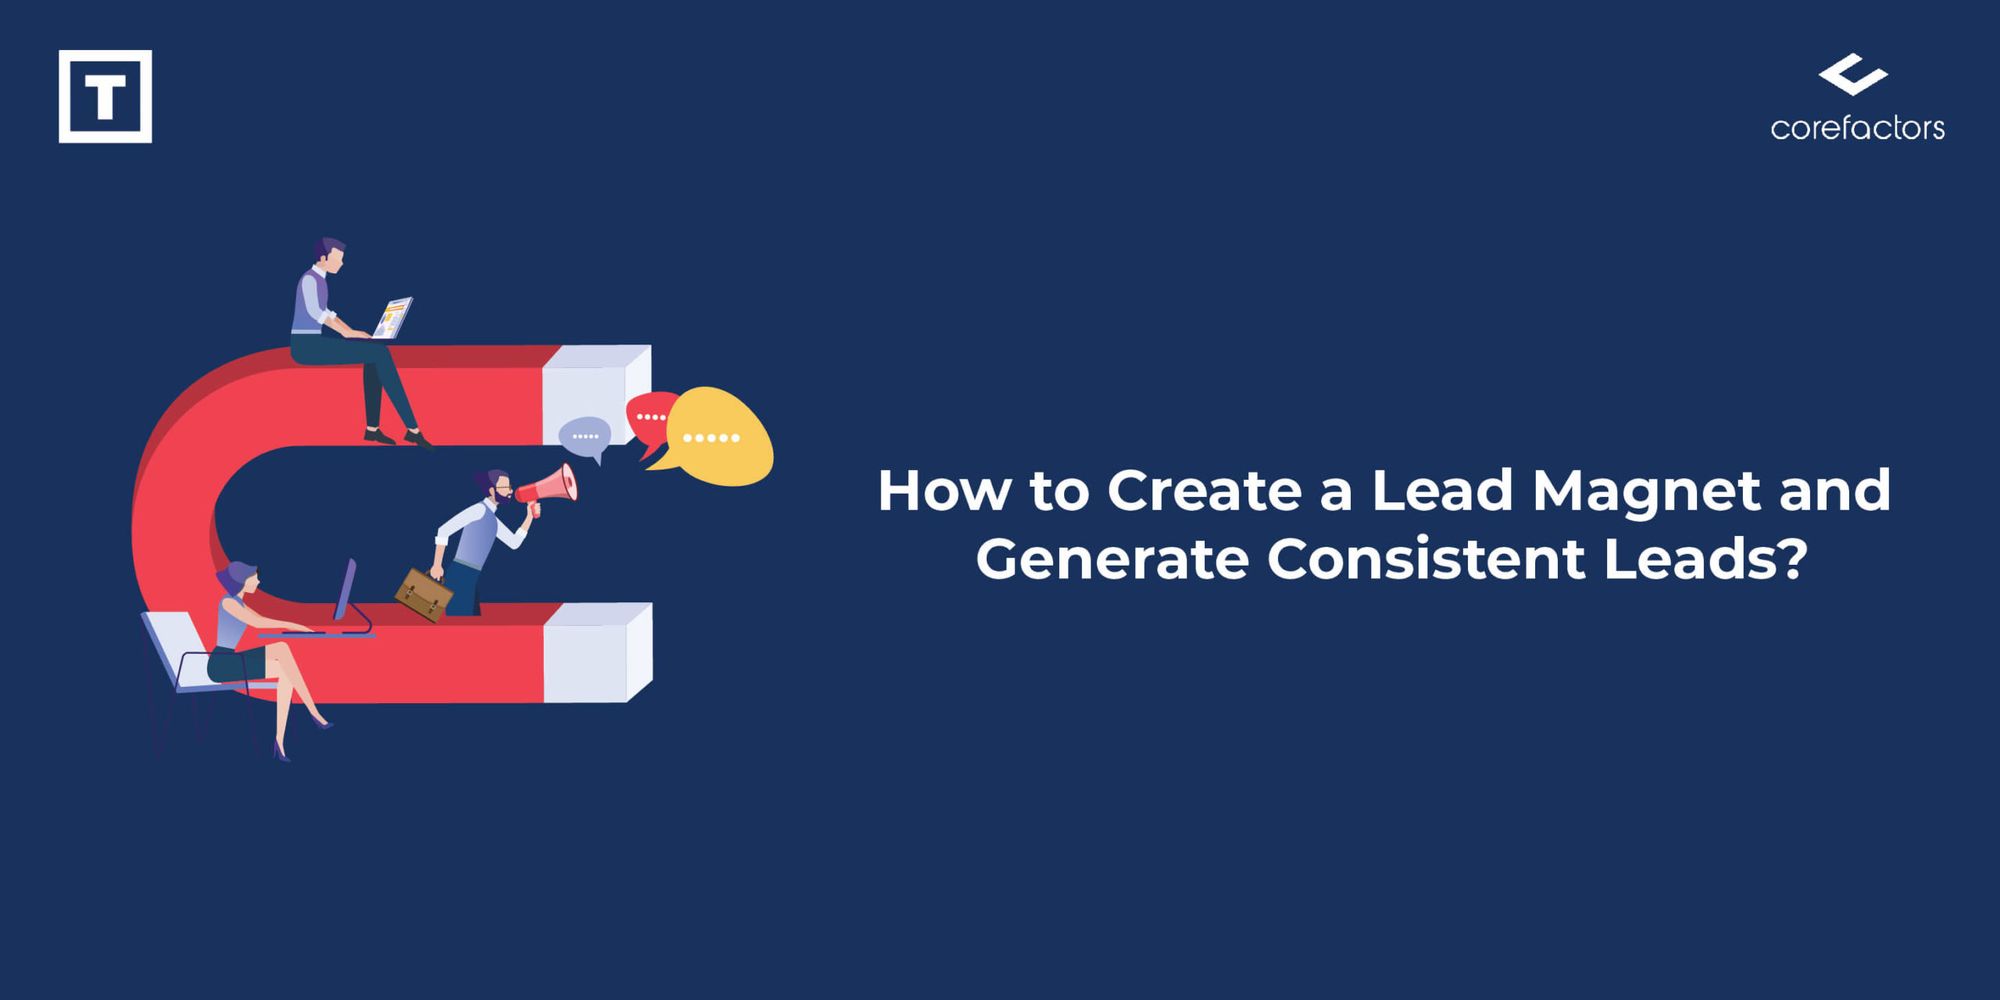 How to Create a Lead Magnet and Generate Consistent Leads?